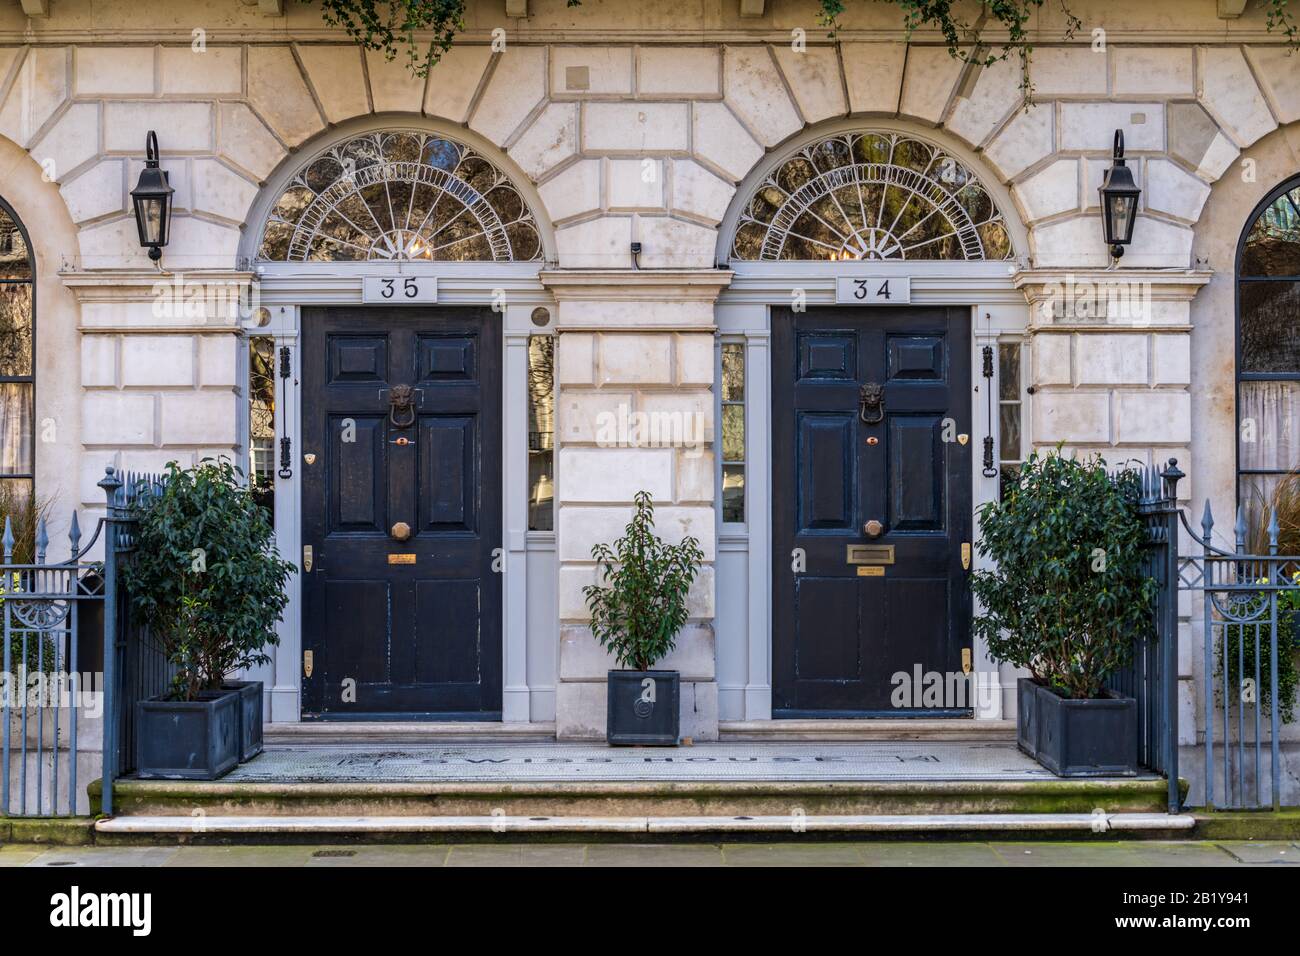 Fitzroy Square London. Doorways of number 34 and 35 Fitzroy Square Fitzrovia London. Called Swiss House from 1936. Owned by film director Guy Ritchie. Stock Photo